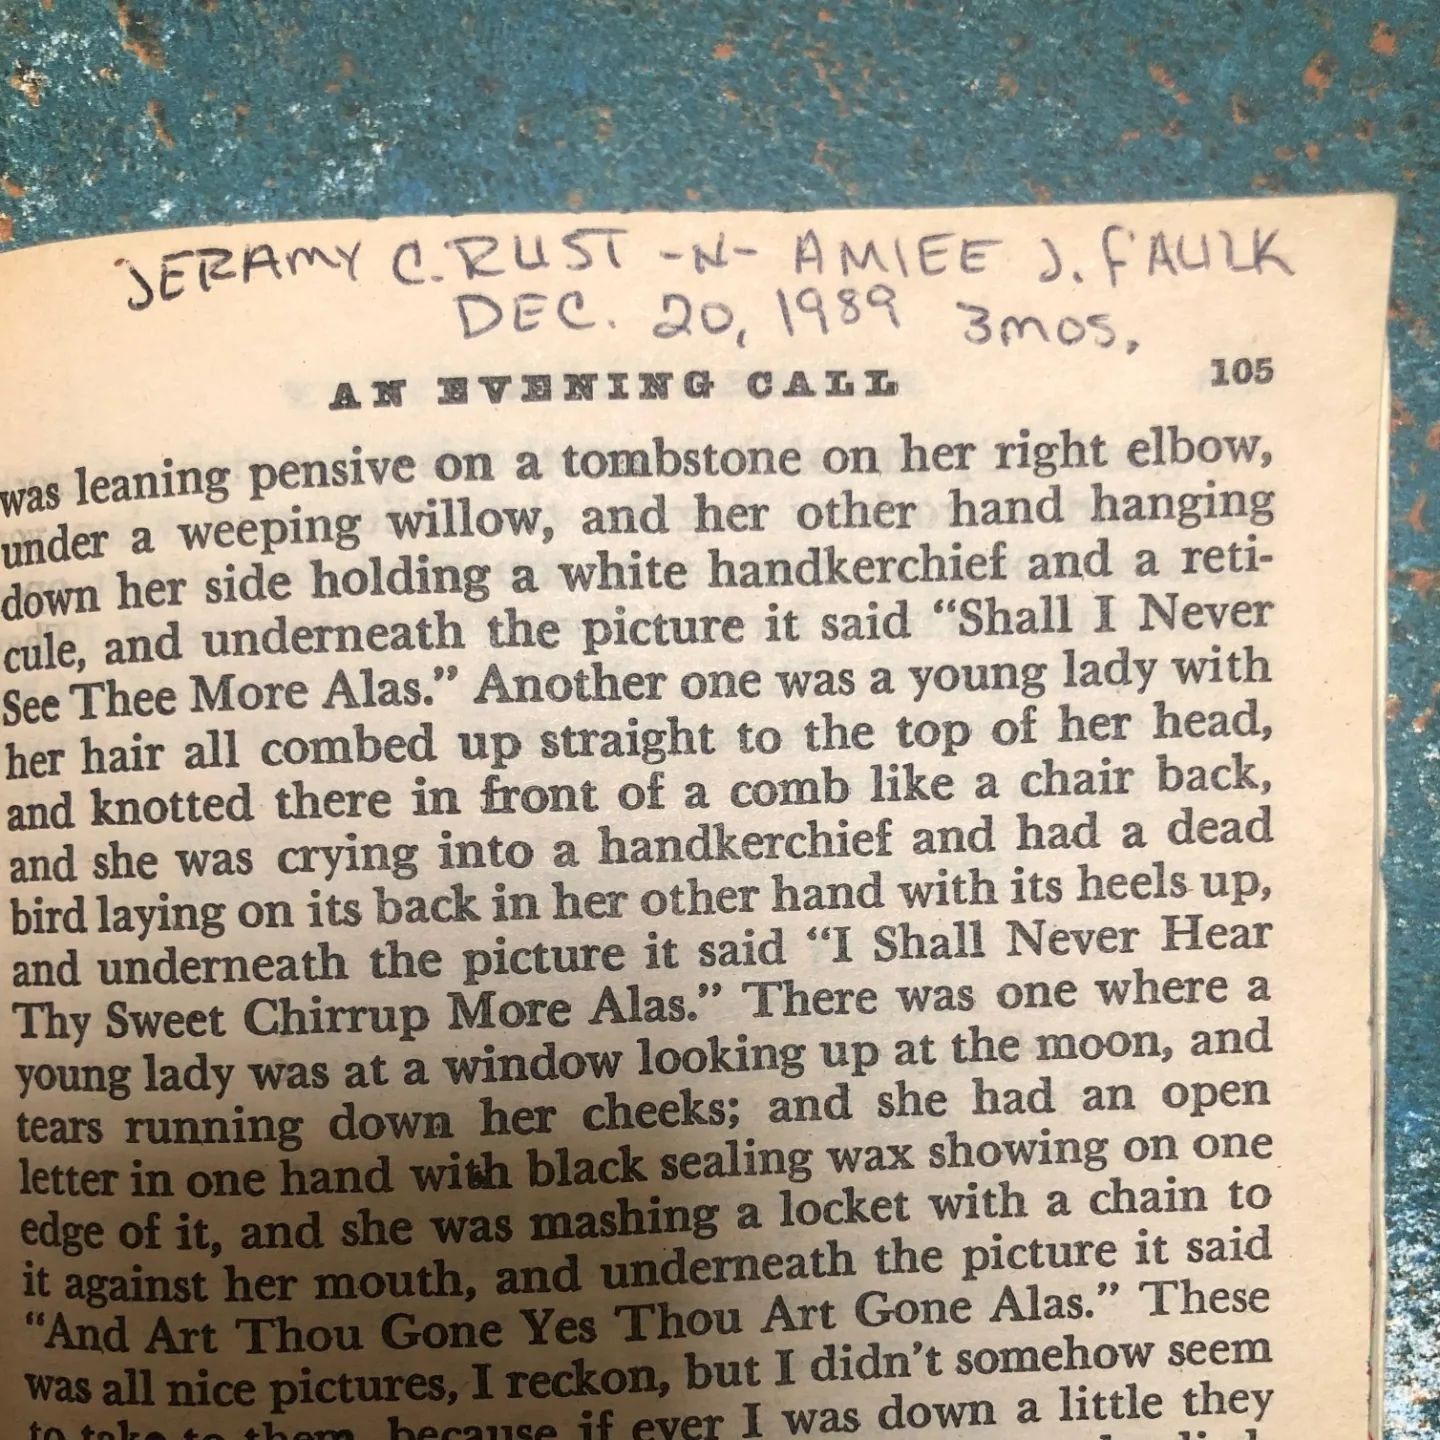 Sent from a reader who found &quot;I ❤️ Aimee&quot; written on the sides of an old copy of Huckleberry Finn. Wherever you are, Aimee and Jeramy, I hope your love is still going strong. 

#thelibraryofborrowedhearts #marginalia